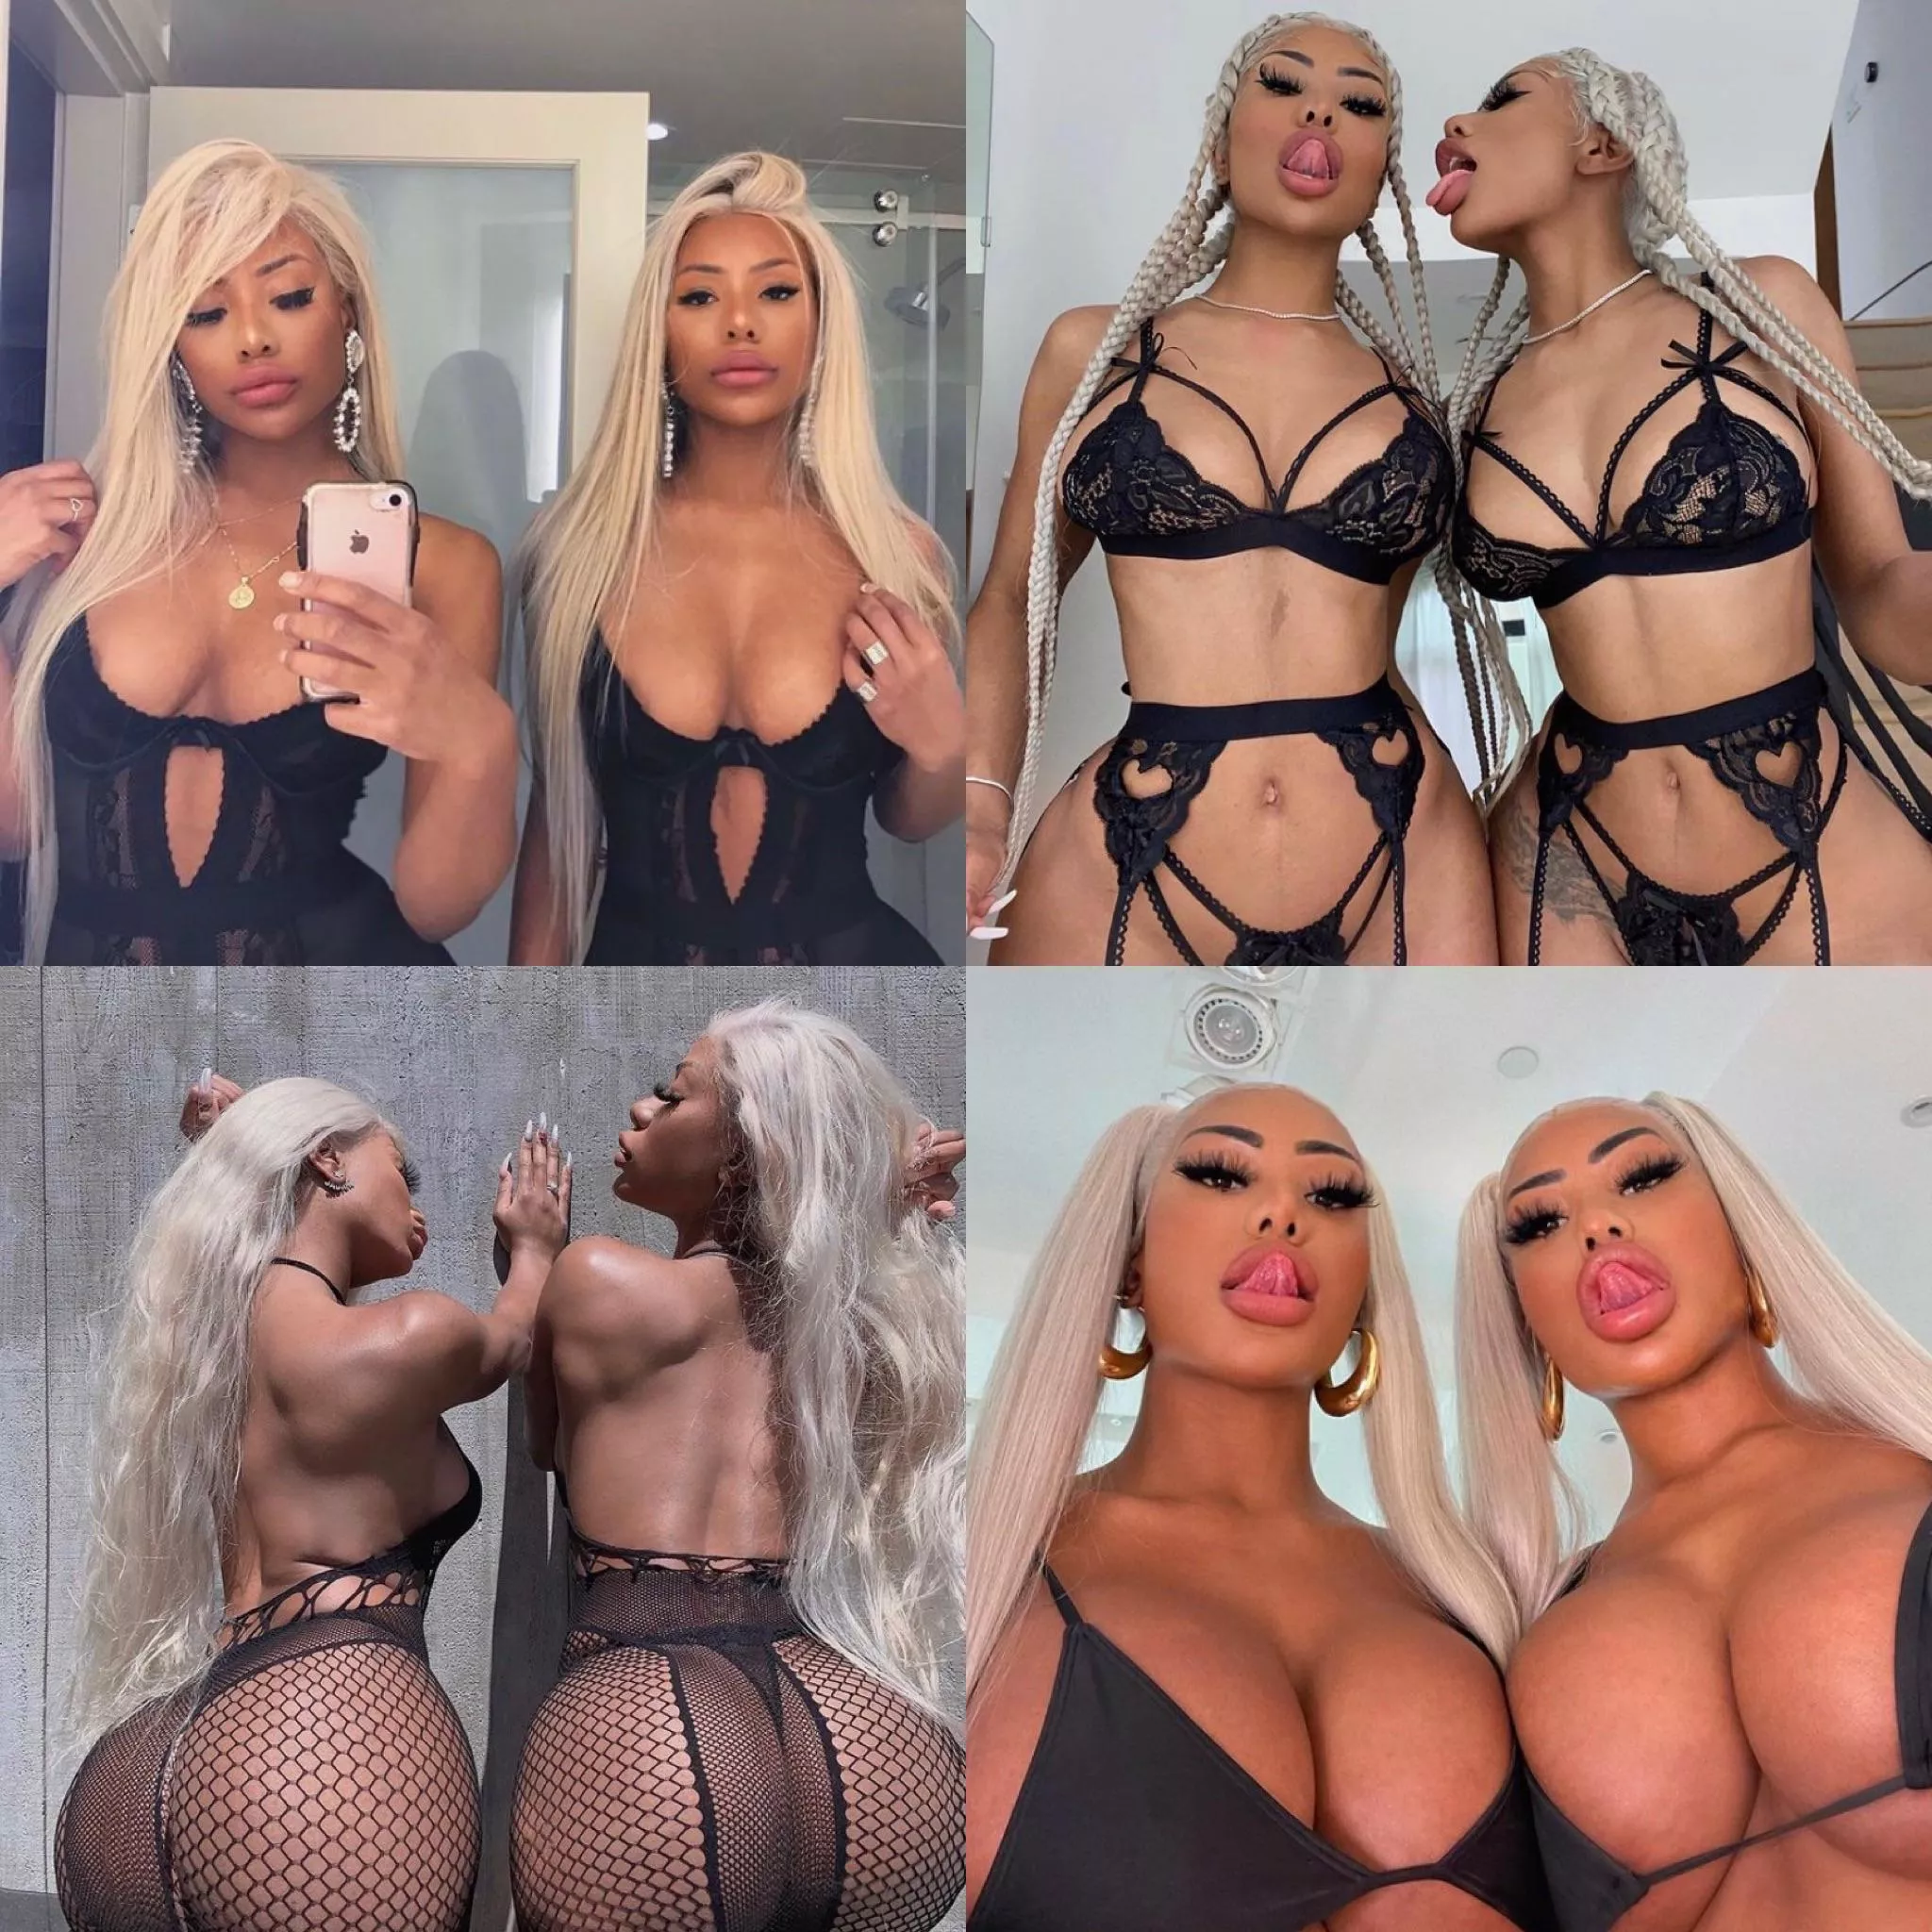 Clermont twins naked